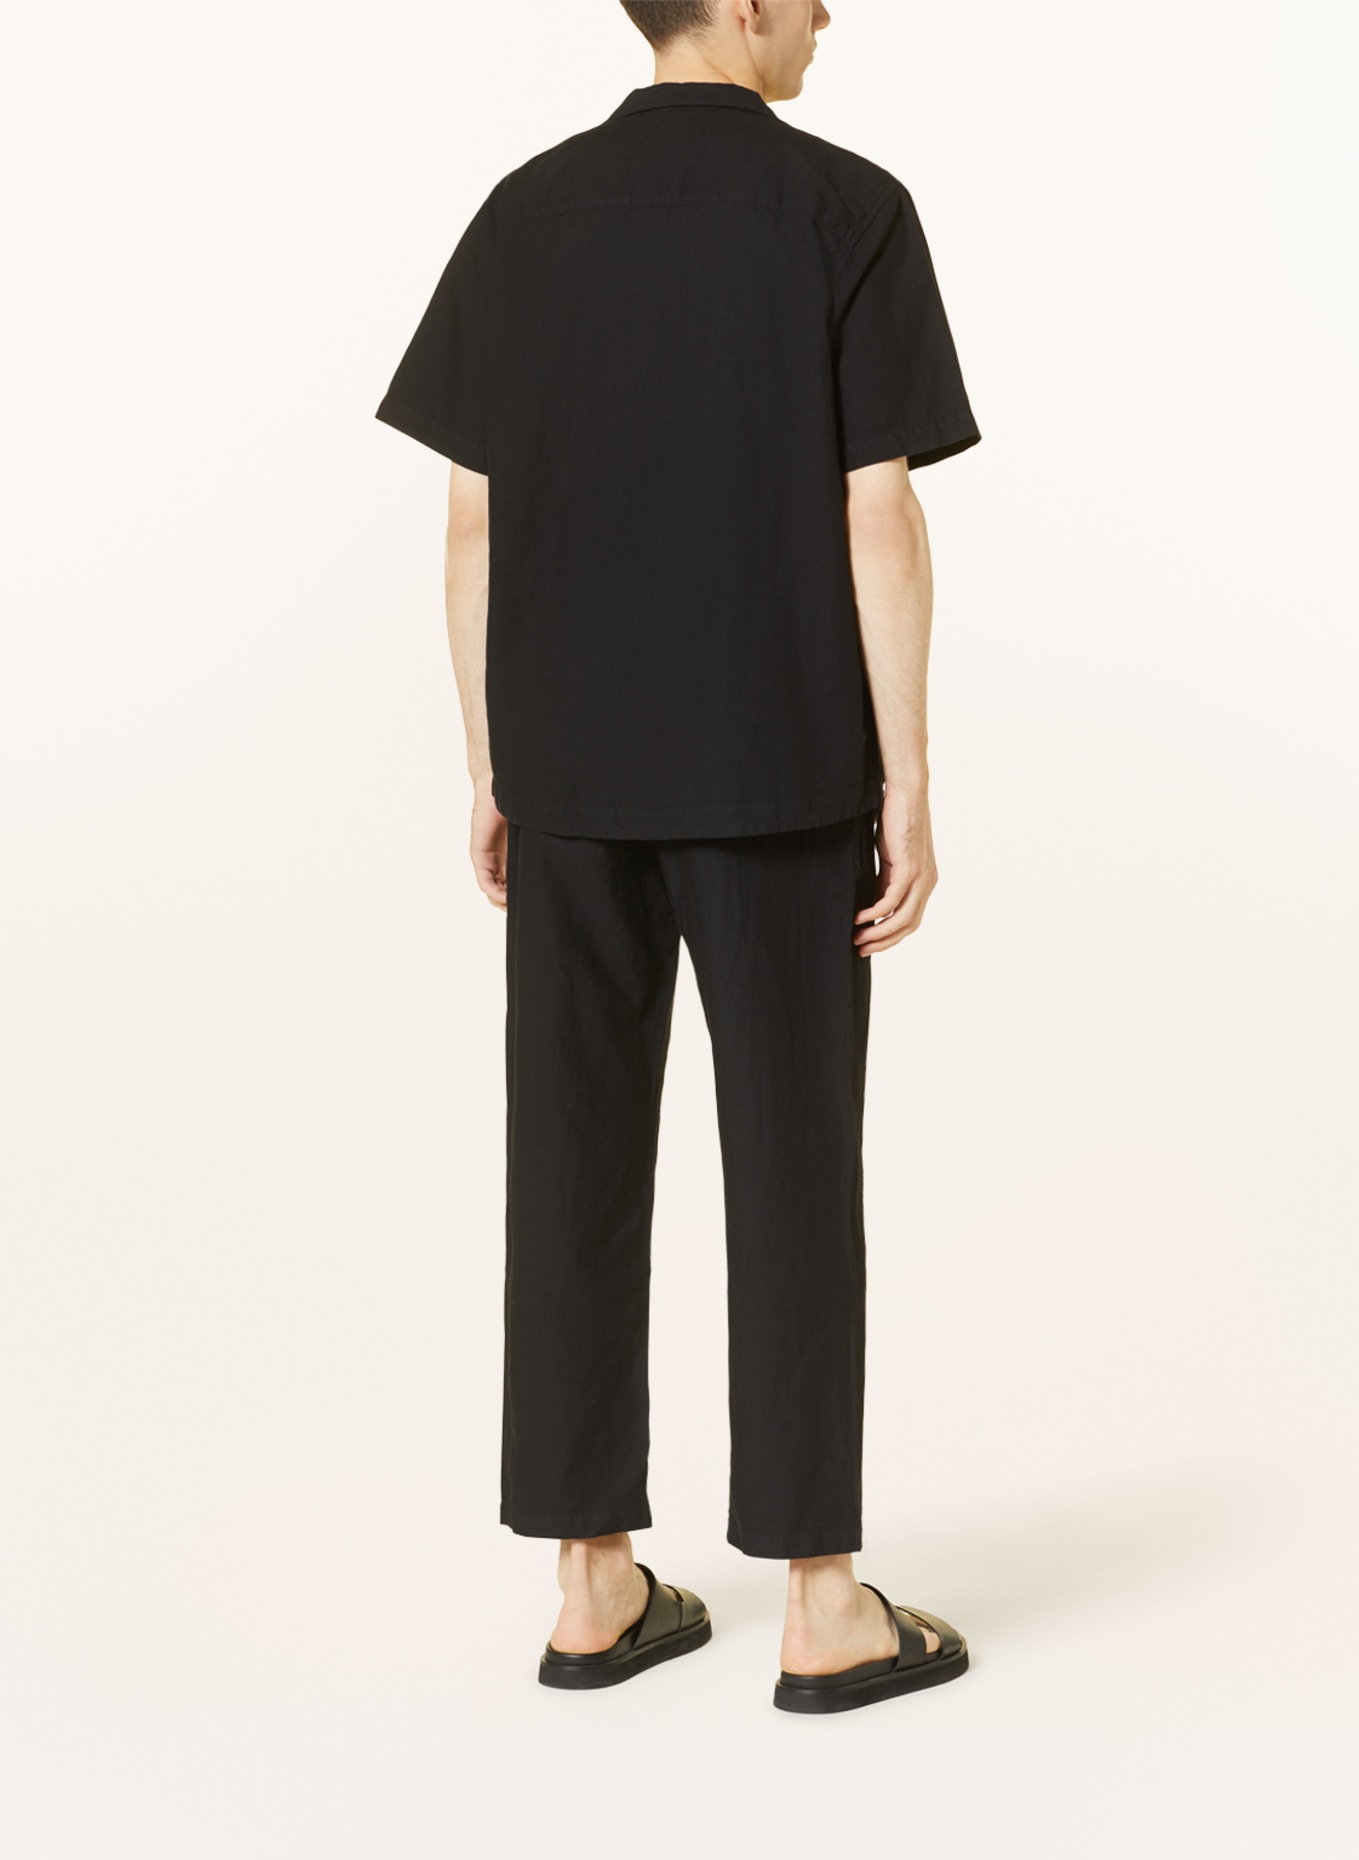 COS Short sleeve shirt relaxed fit, Color: BLACK (Image 3)